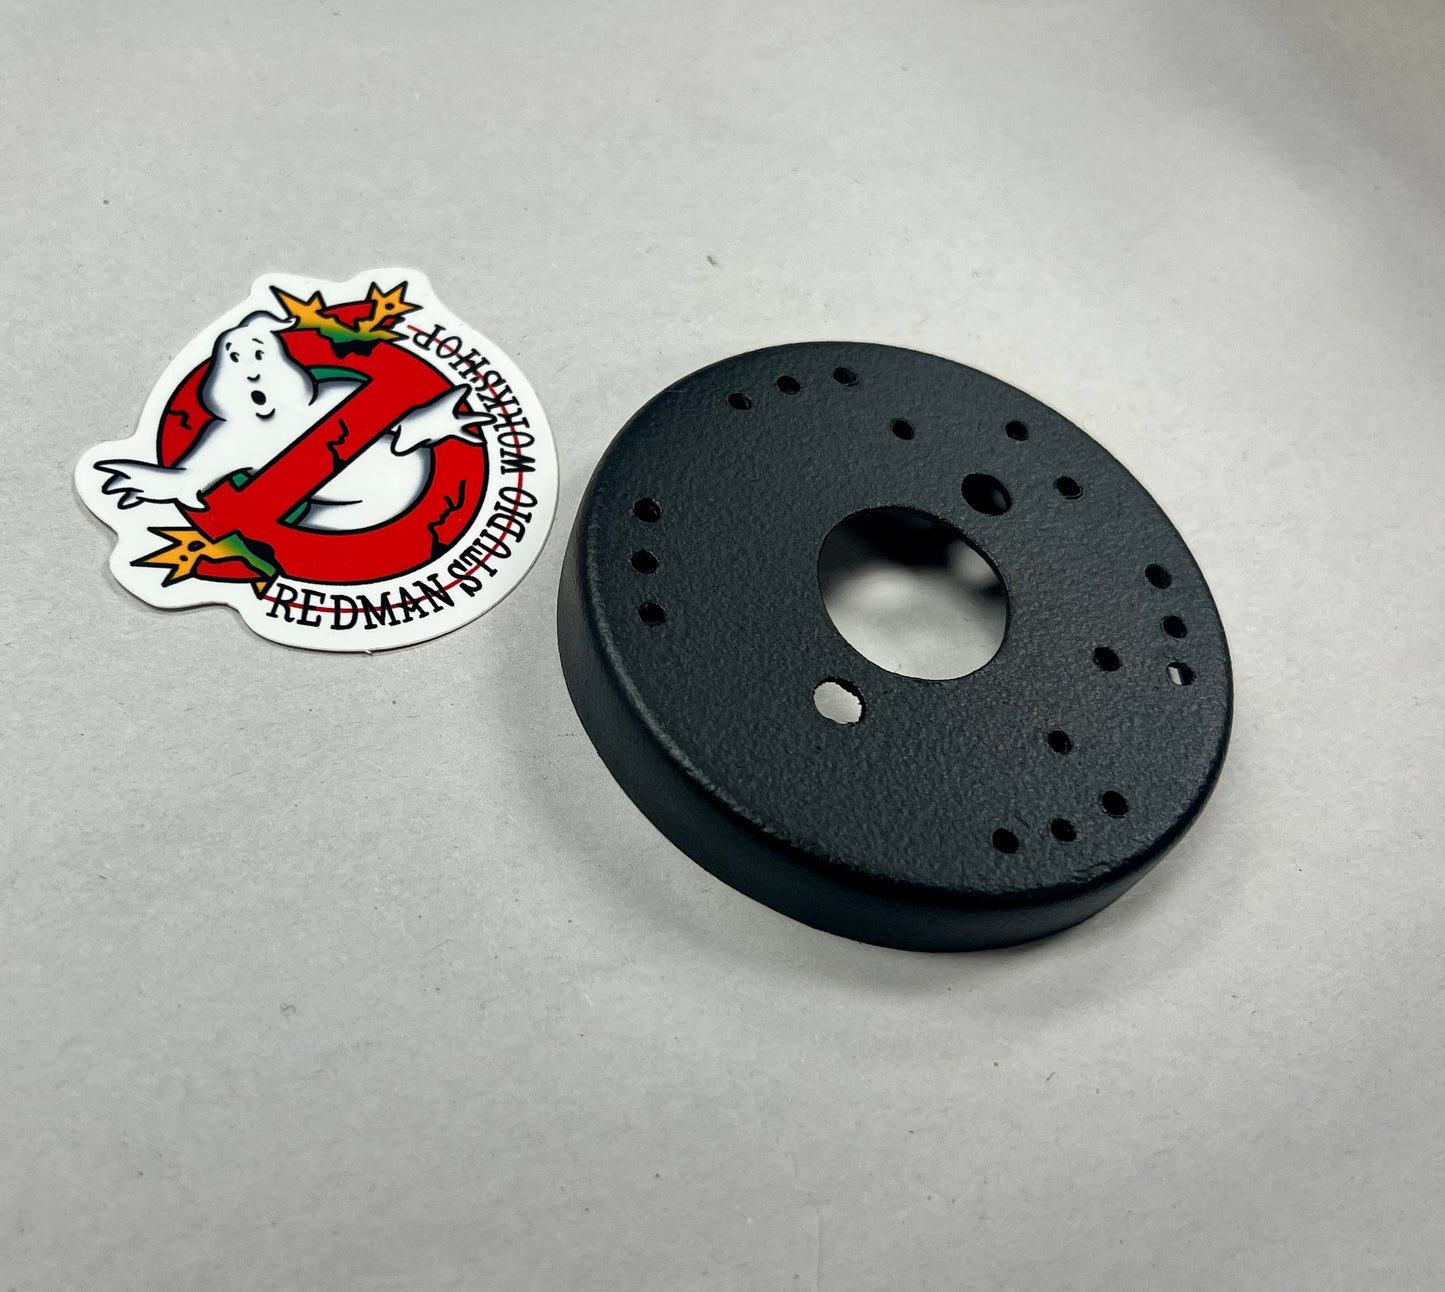 GB Modular Valve (Clippard Disc) Cover for Proton Pack